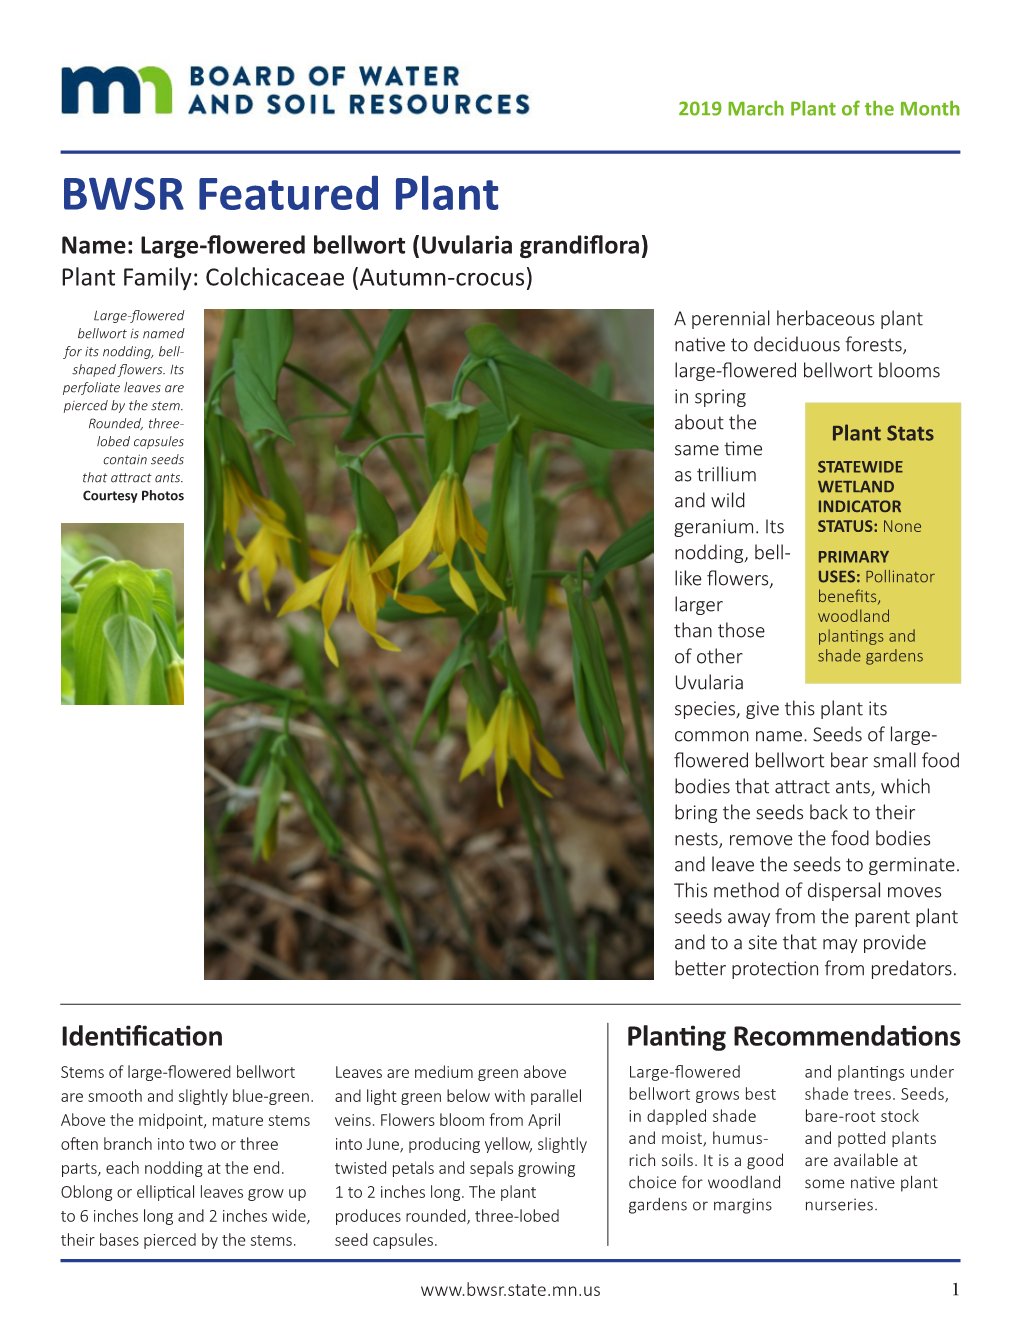 Read More About Large Flowered Bellwort (Pdf)